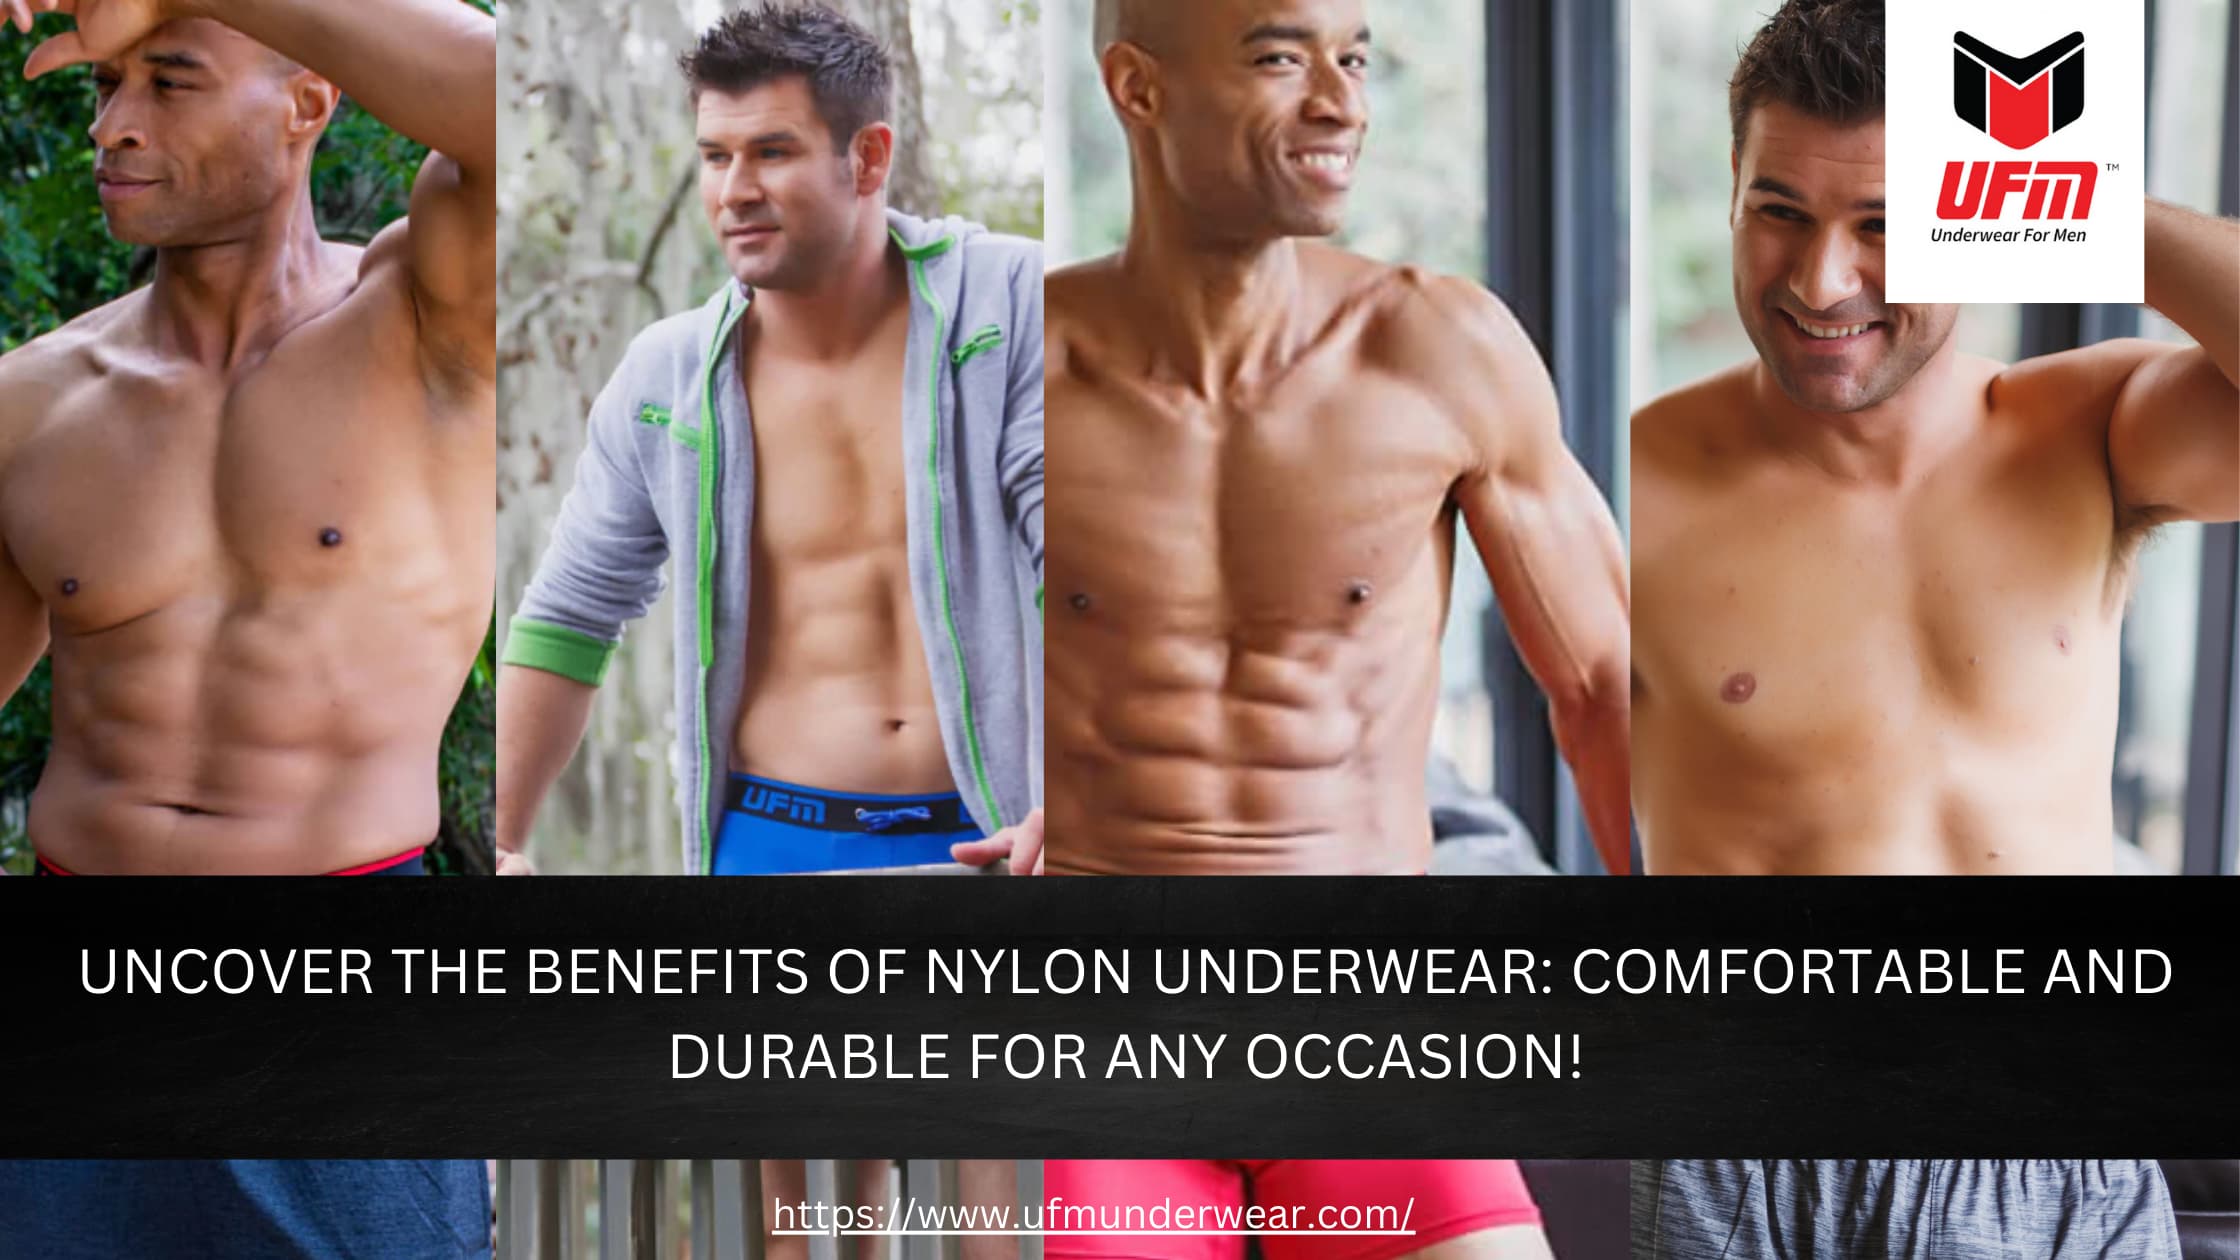 Uncover the Benefits of Nylon Underwear: Comfortable and Durable for Any Occasion